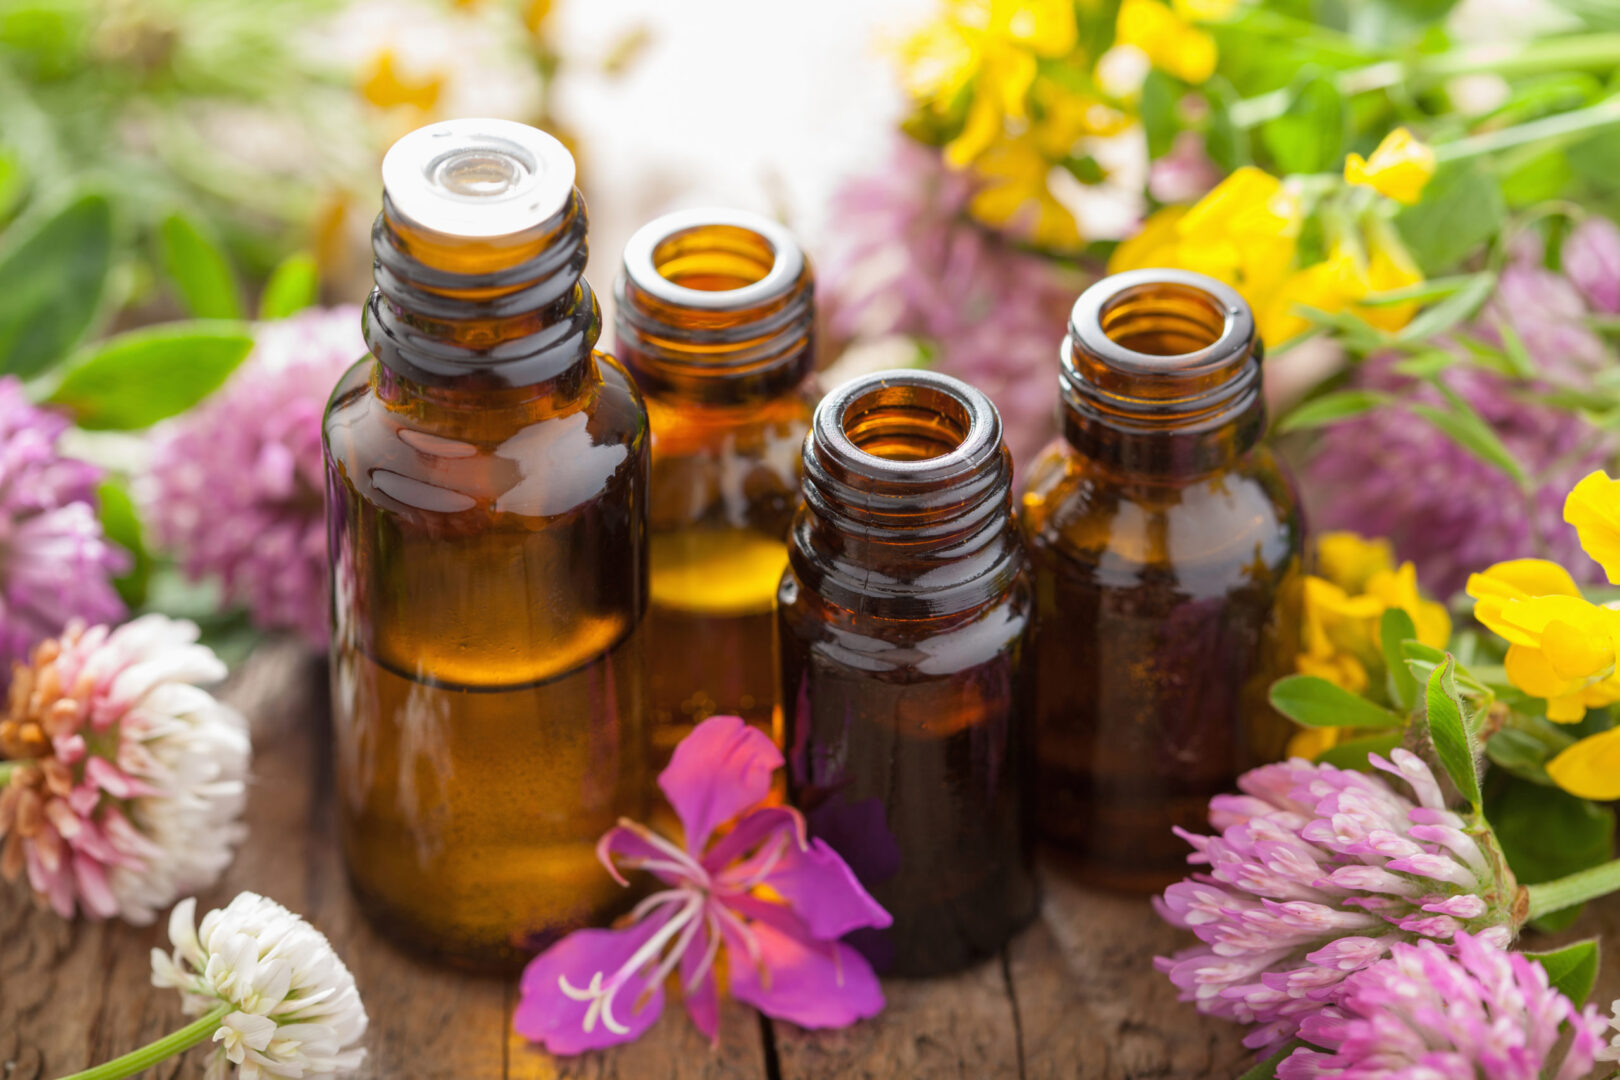 essential oils and medical flowers herbs 2021 08 26 16 57 43 utc scaled